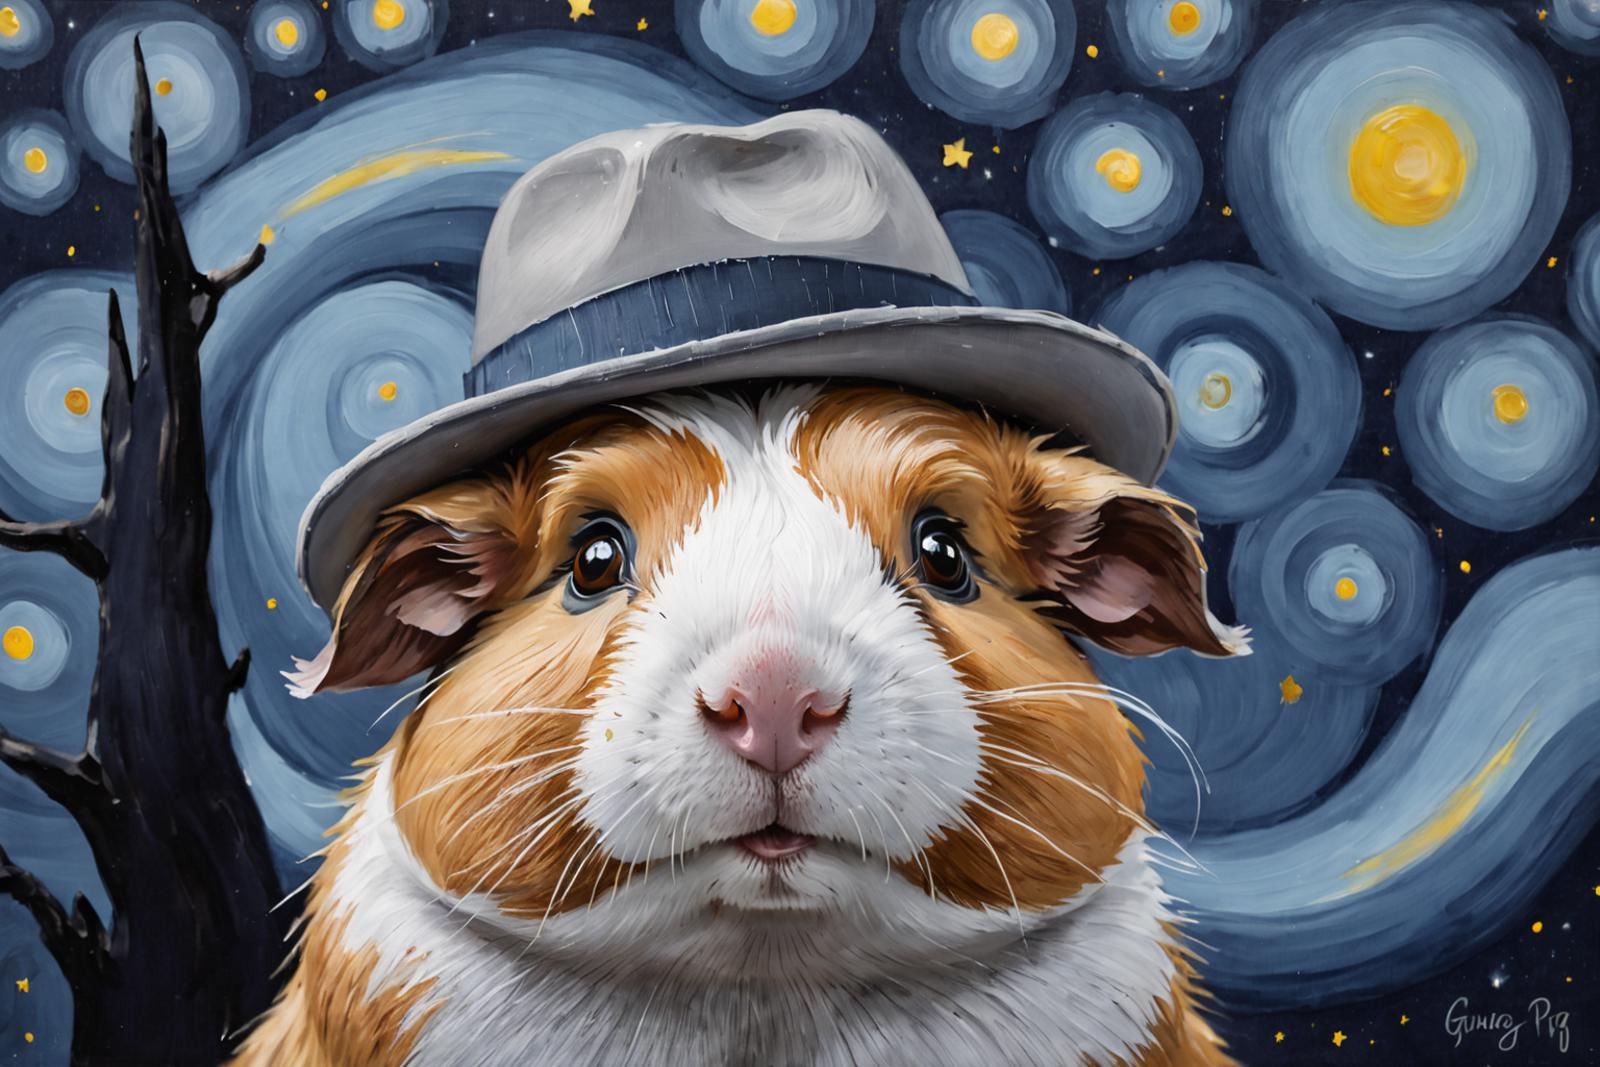 A cute painting of a hamster wearing a hat.